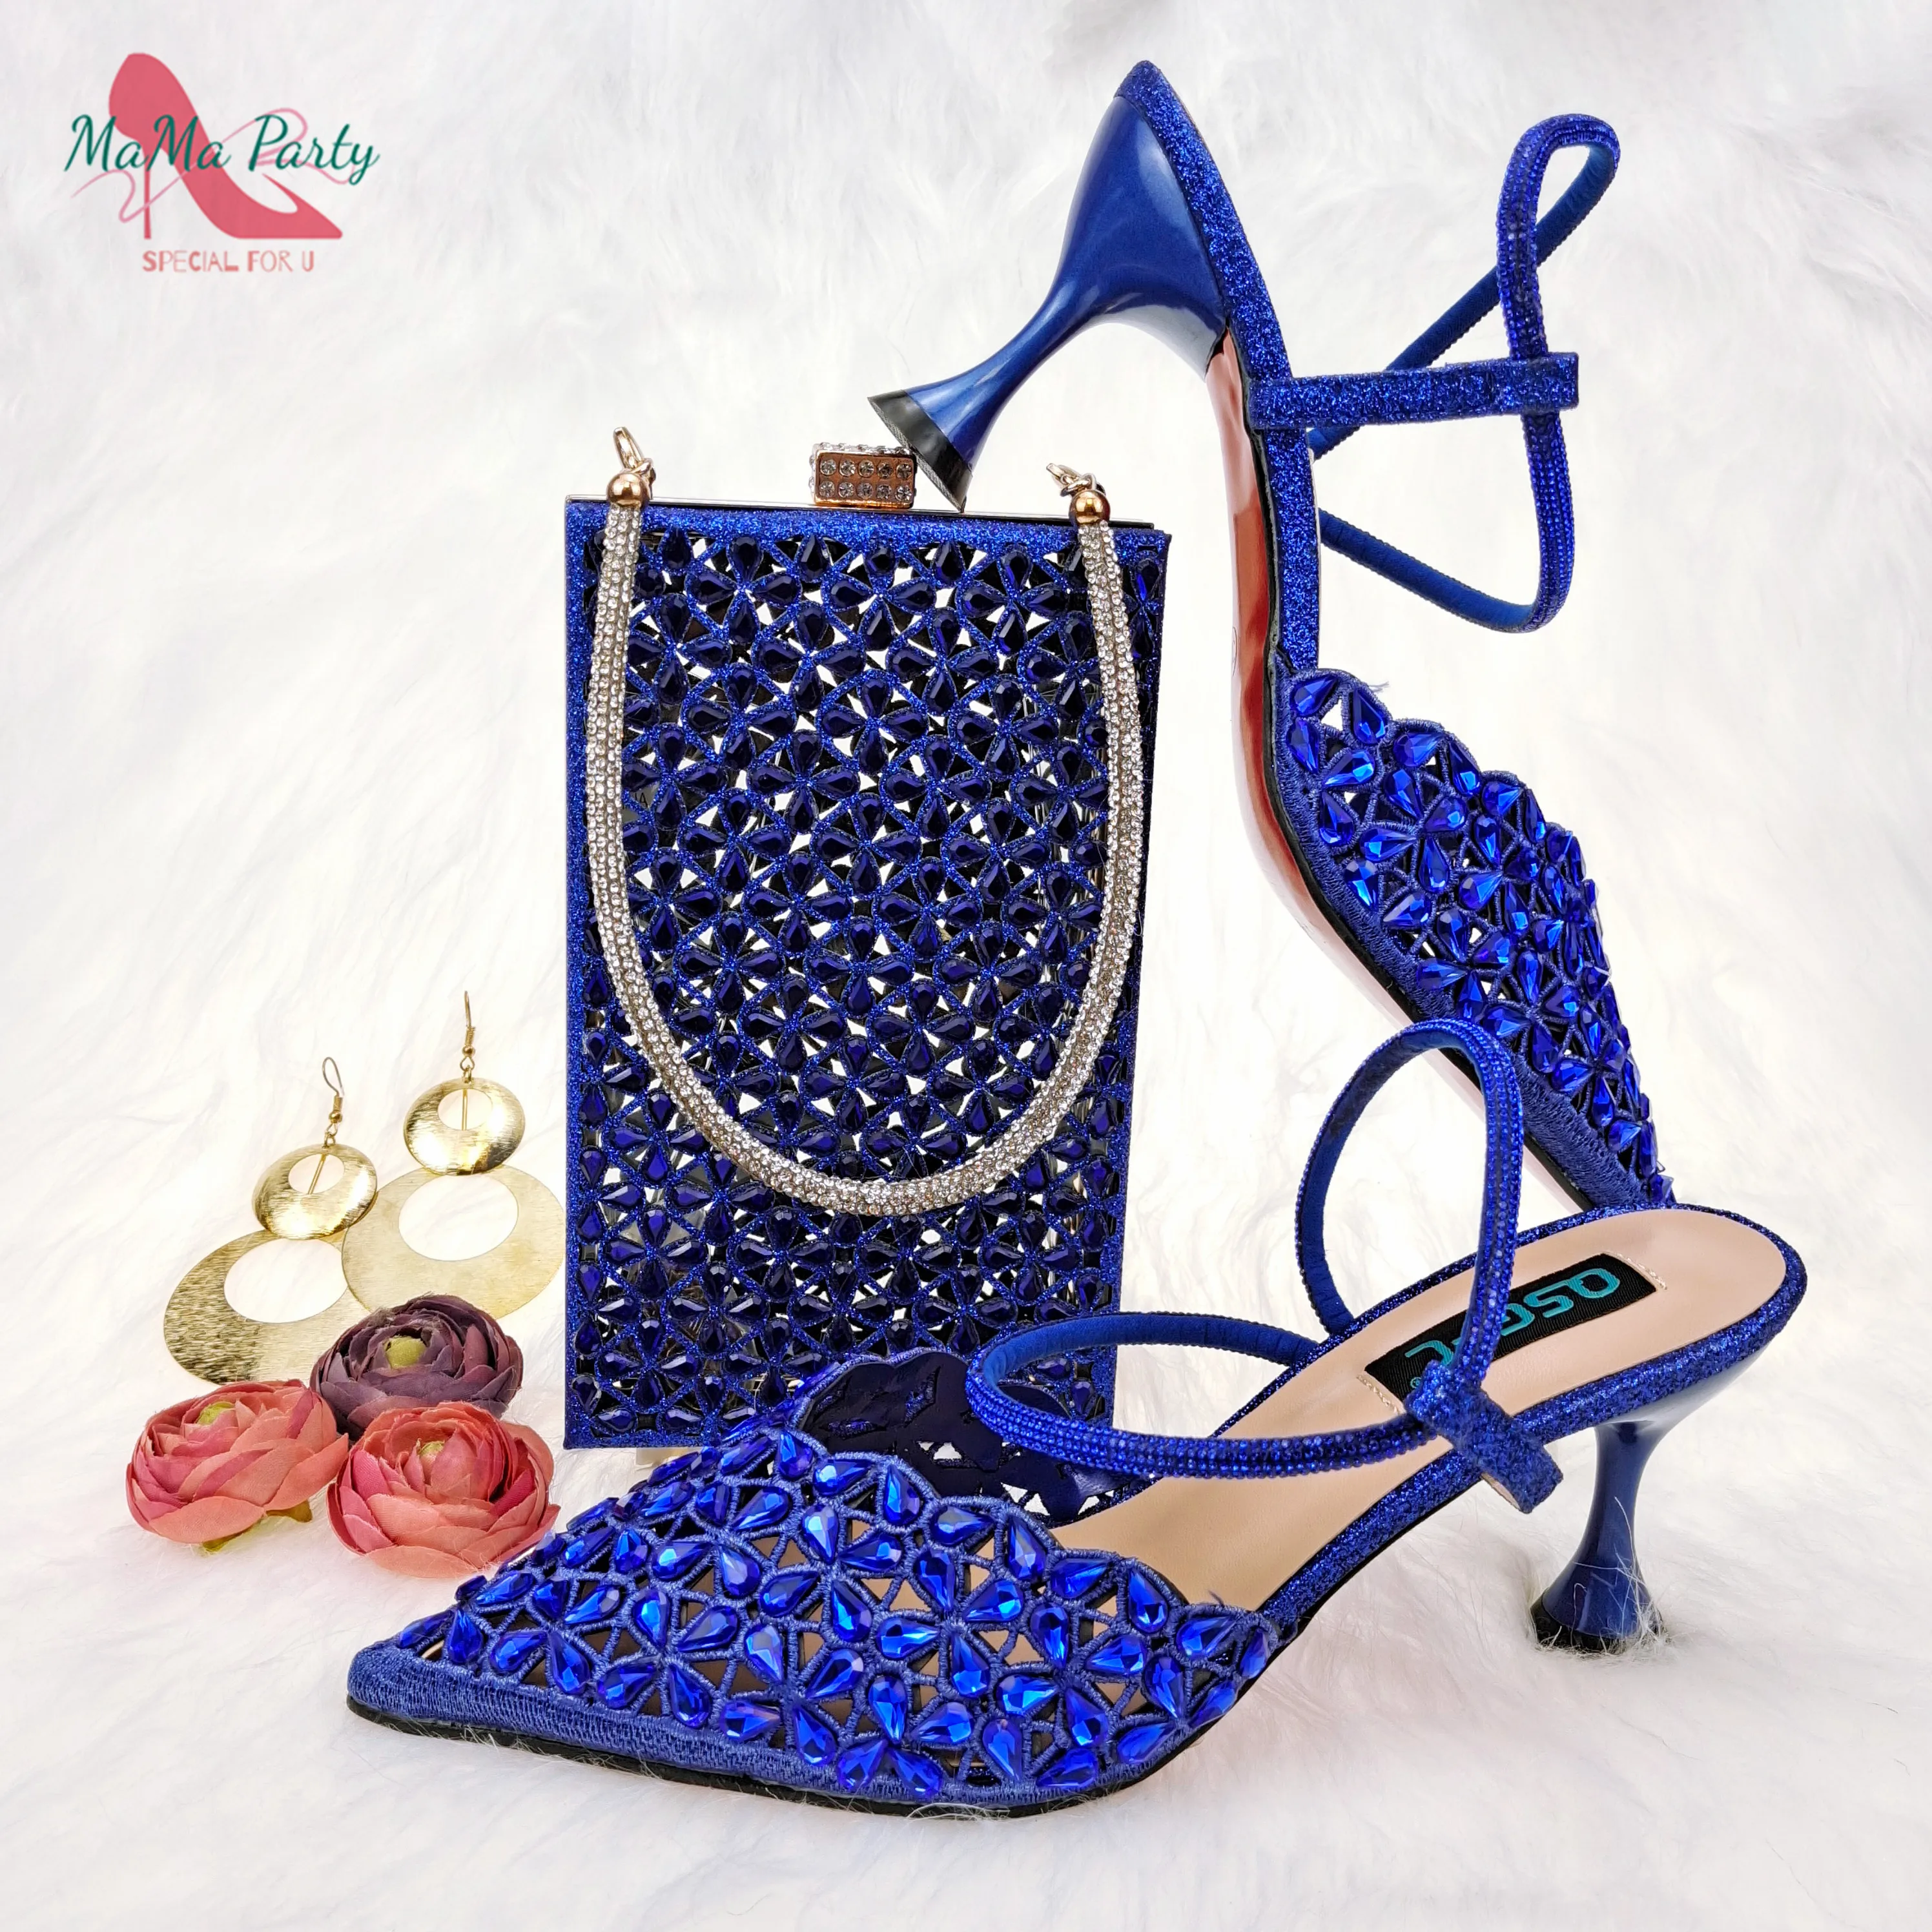 

New Arrivals Pointed Toe Ladies Sandal Decorated with Shining Crystal Shoes Matching Bag Set in Royal Blue